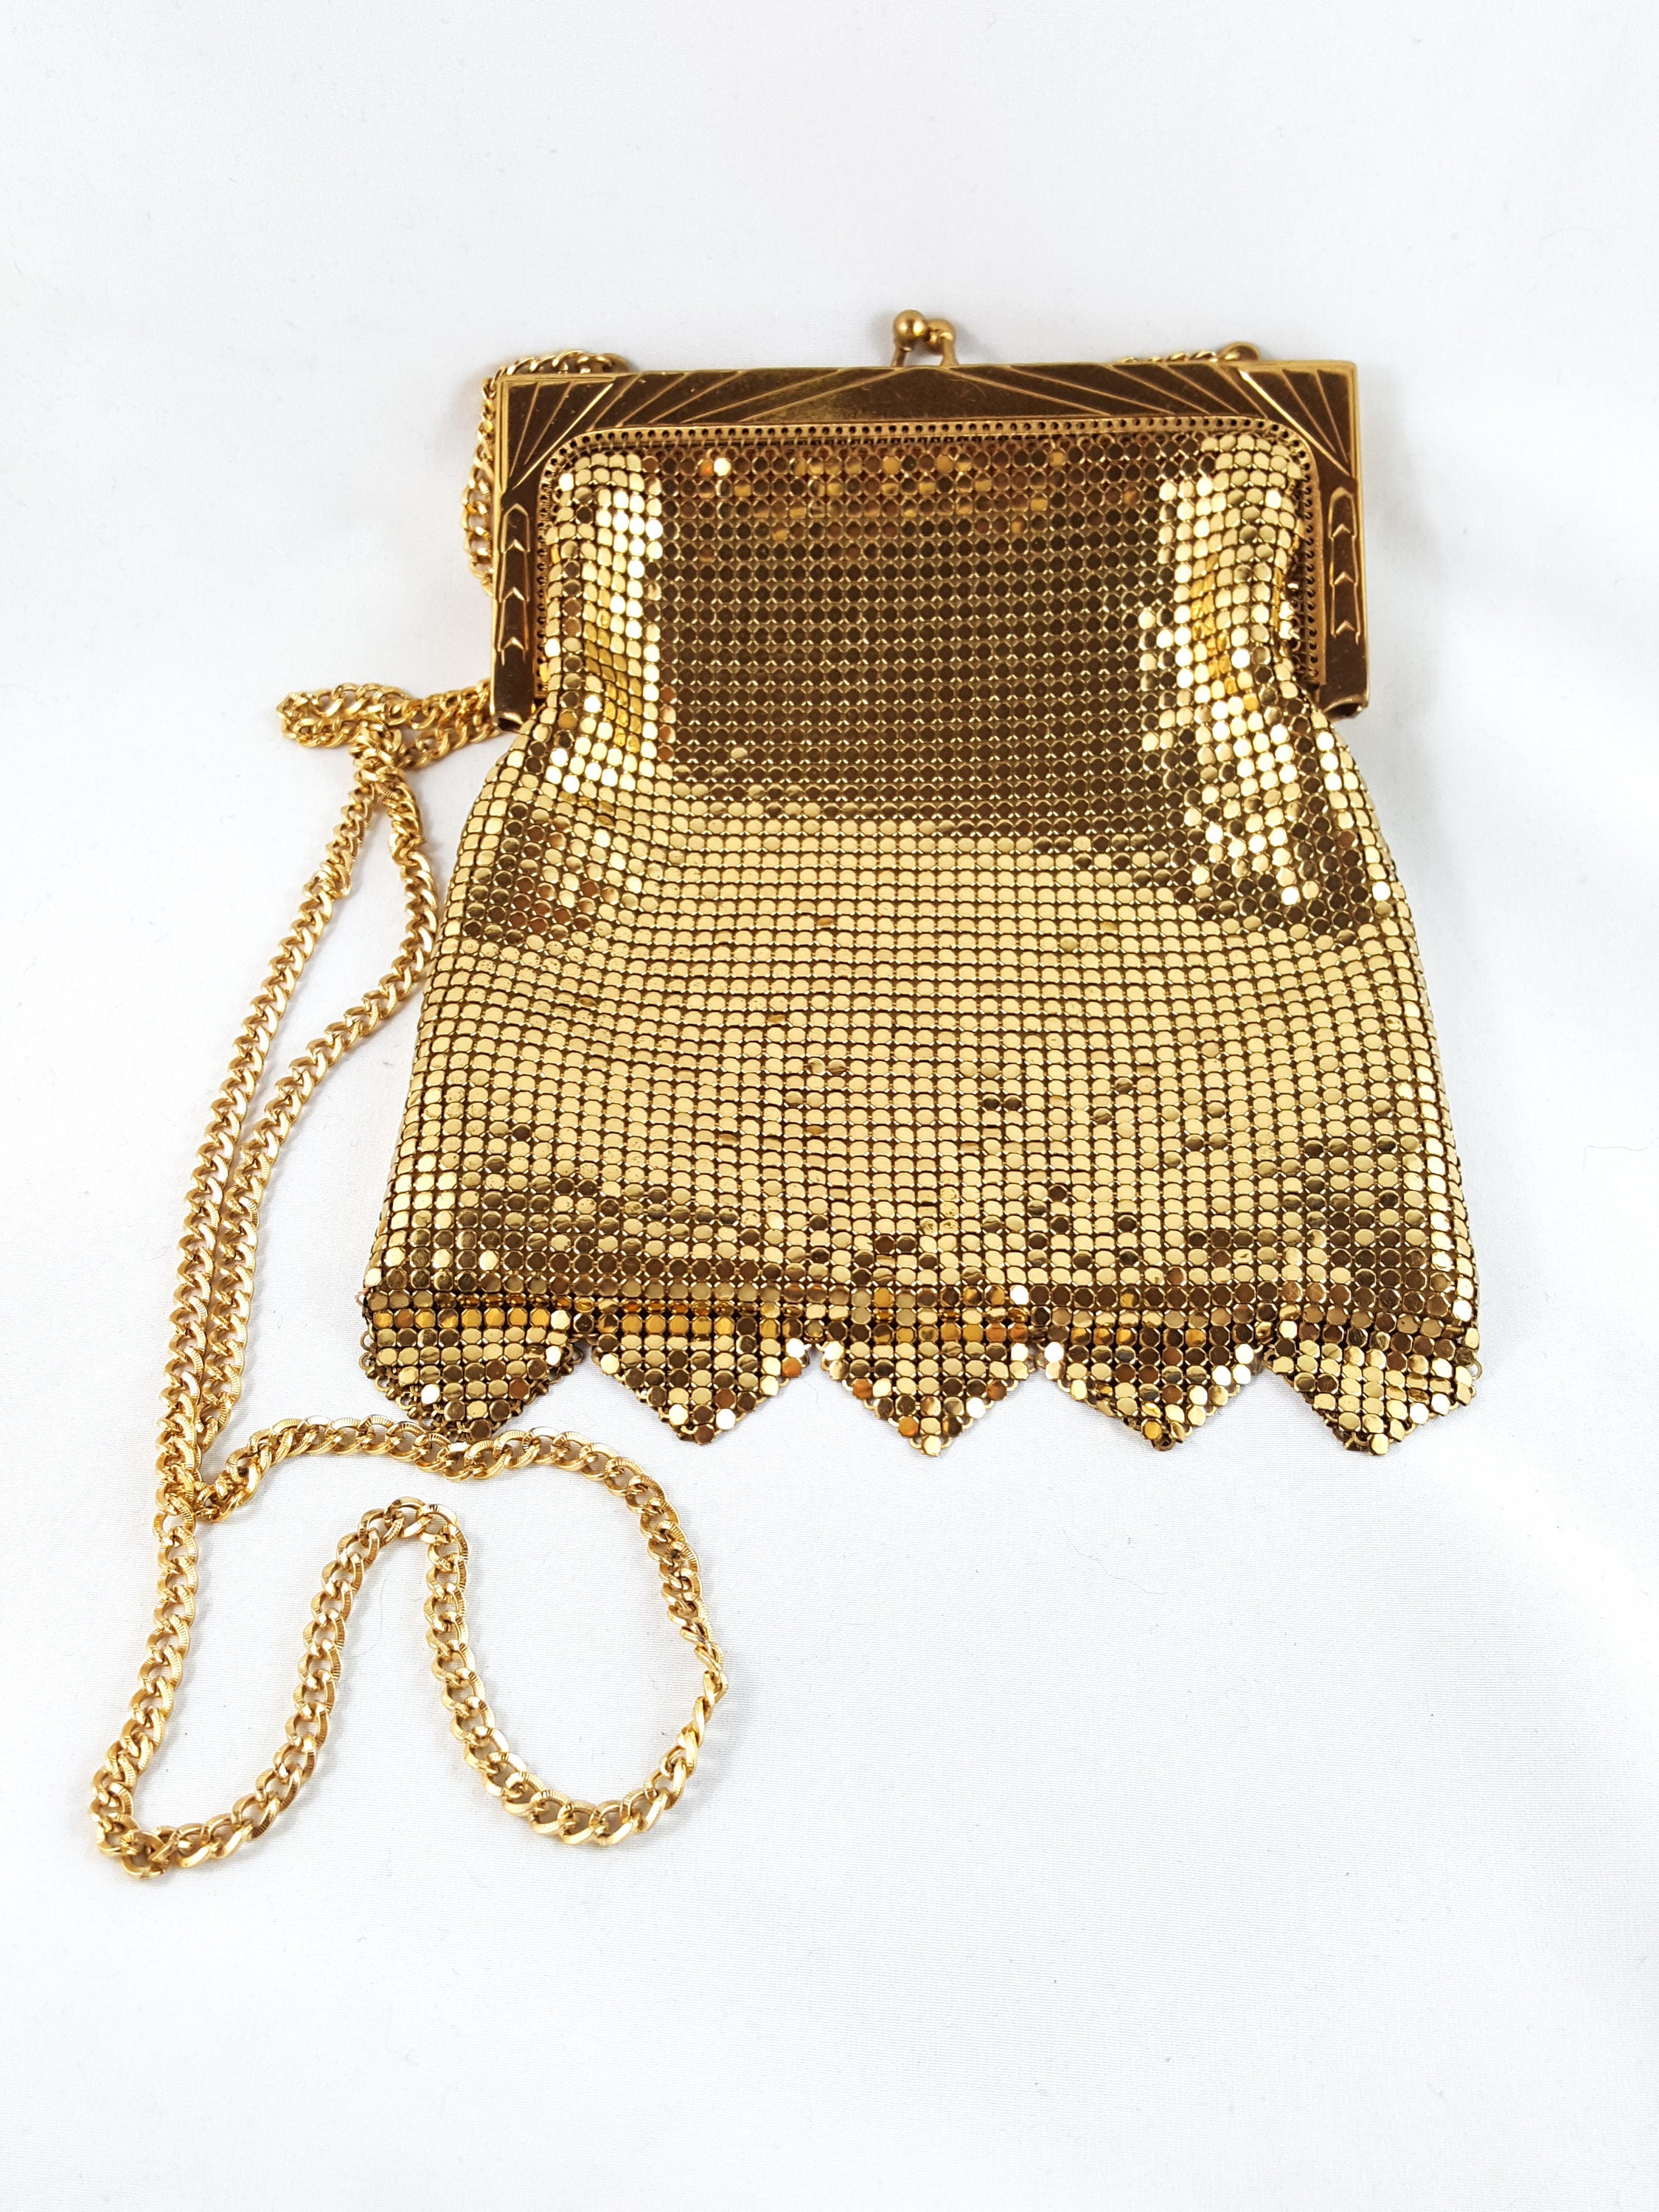 Magnificent Vintage 70s WHITING and DAVIS Gold MESH Bag Flapper Purse ...